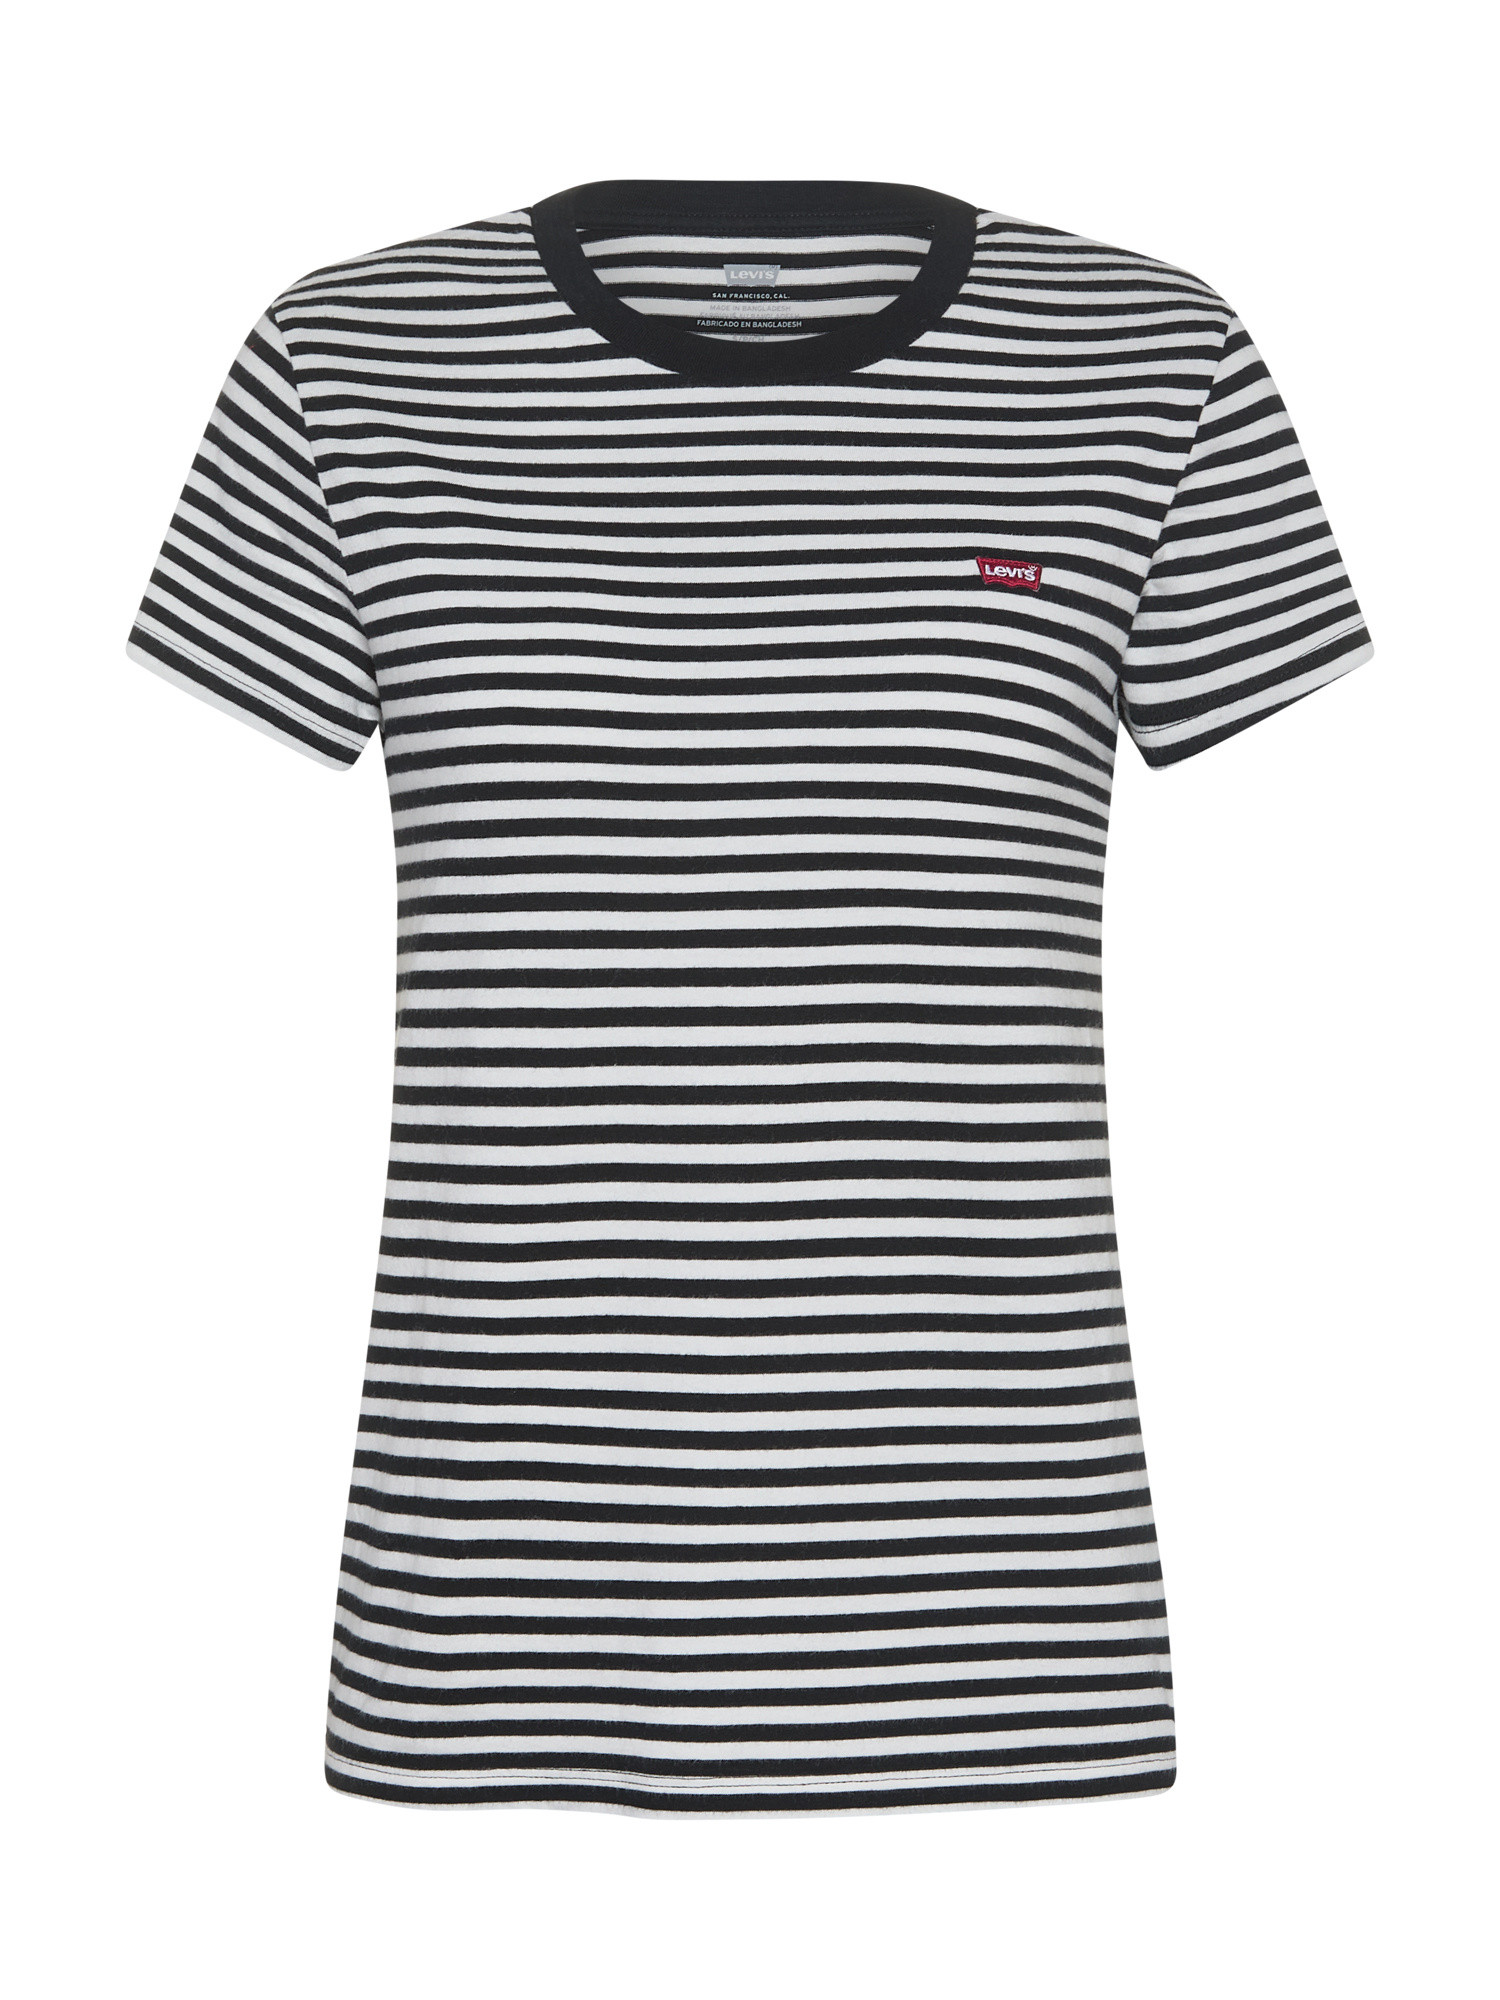 Levi's - T-shirt a righe in cotone con logo, Bianco, large image number 0